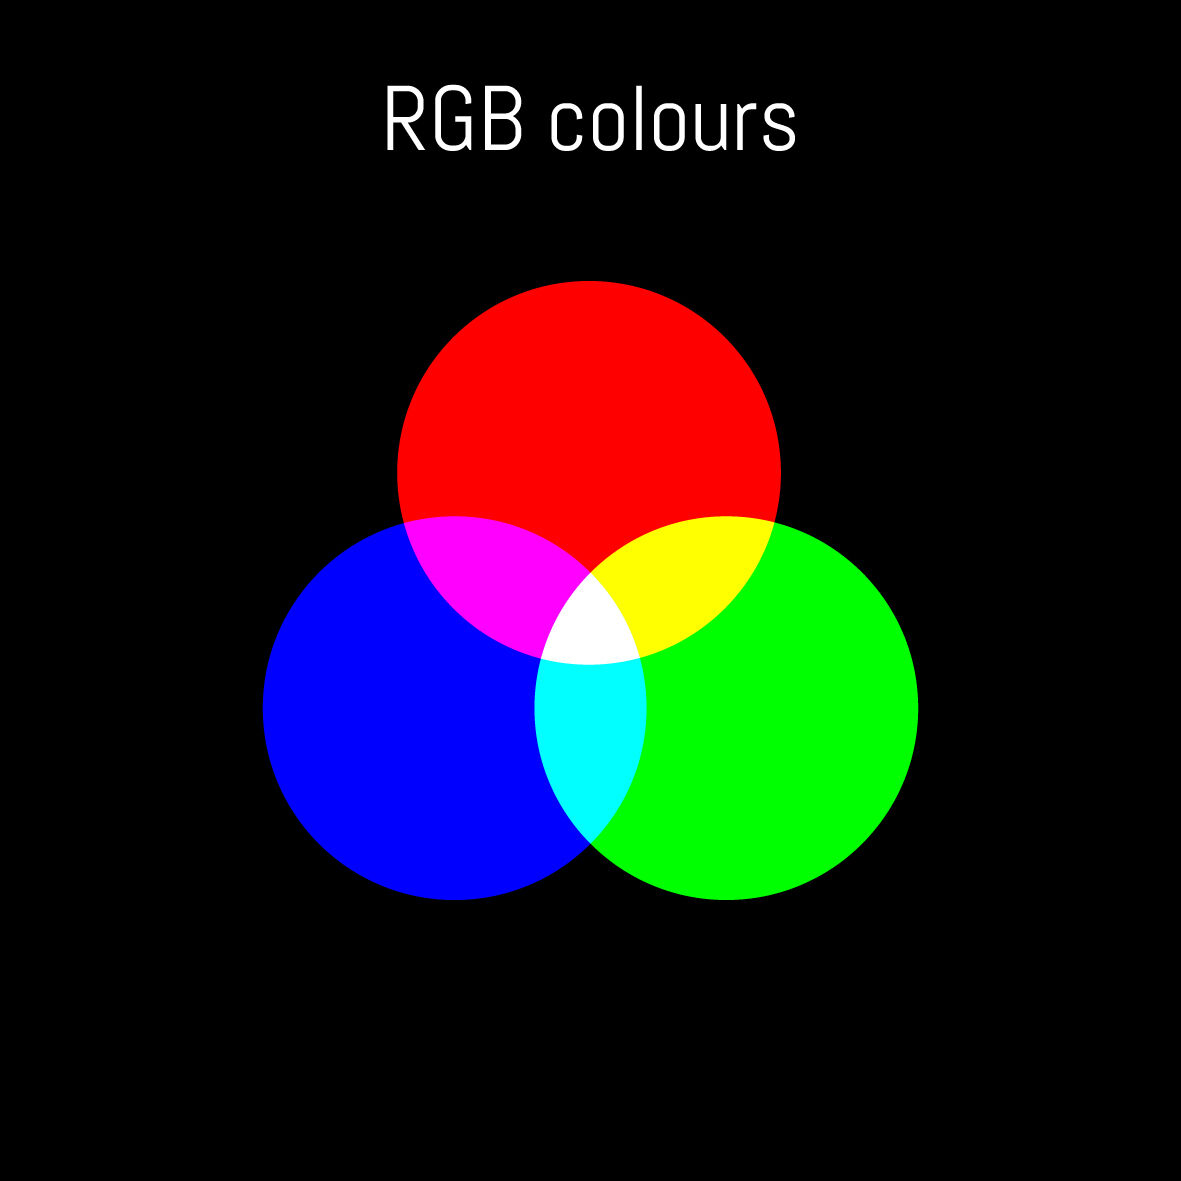 What is RGB?